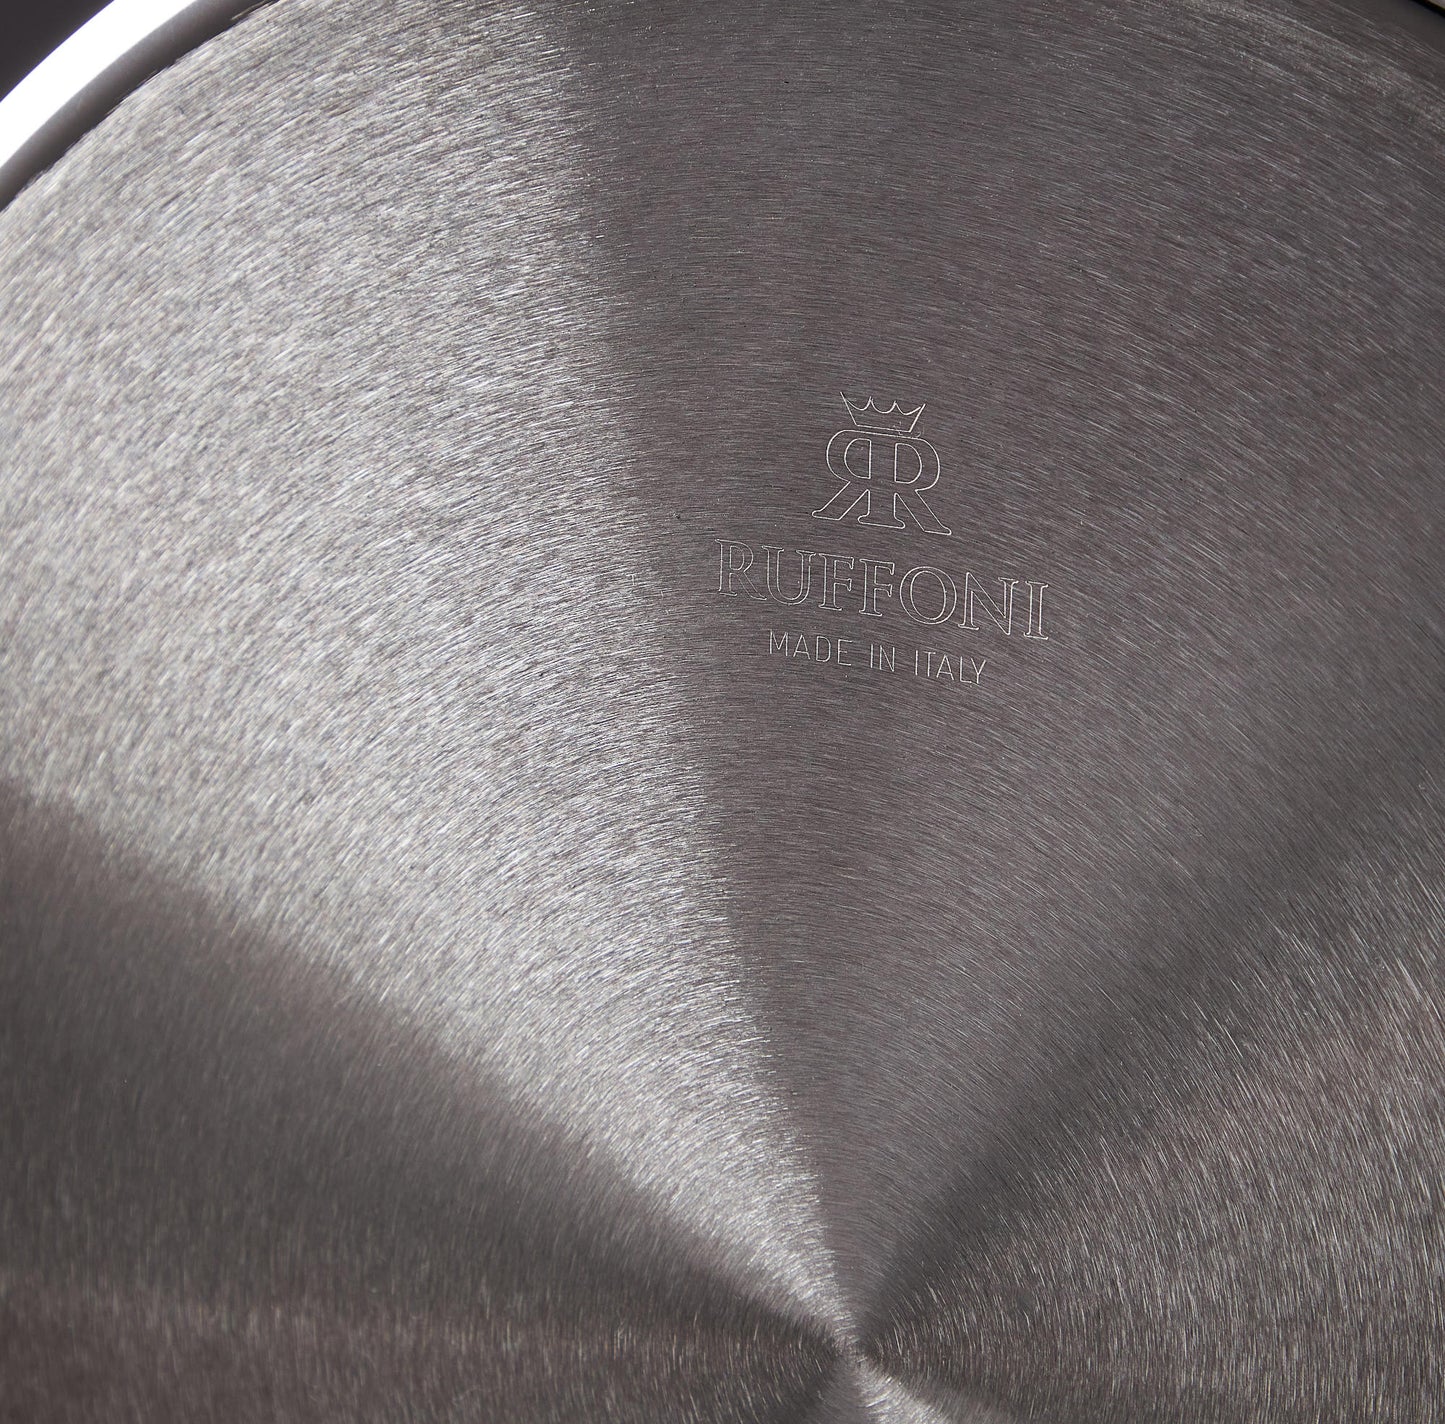 Ruffoni Made in Italy brand logo stamped under stainless steel saucepan for authenticity